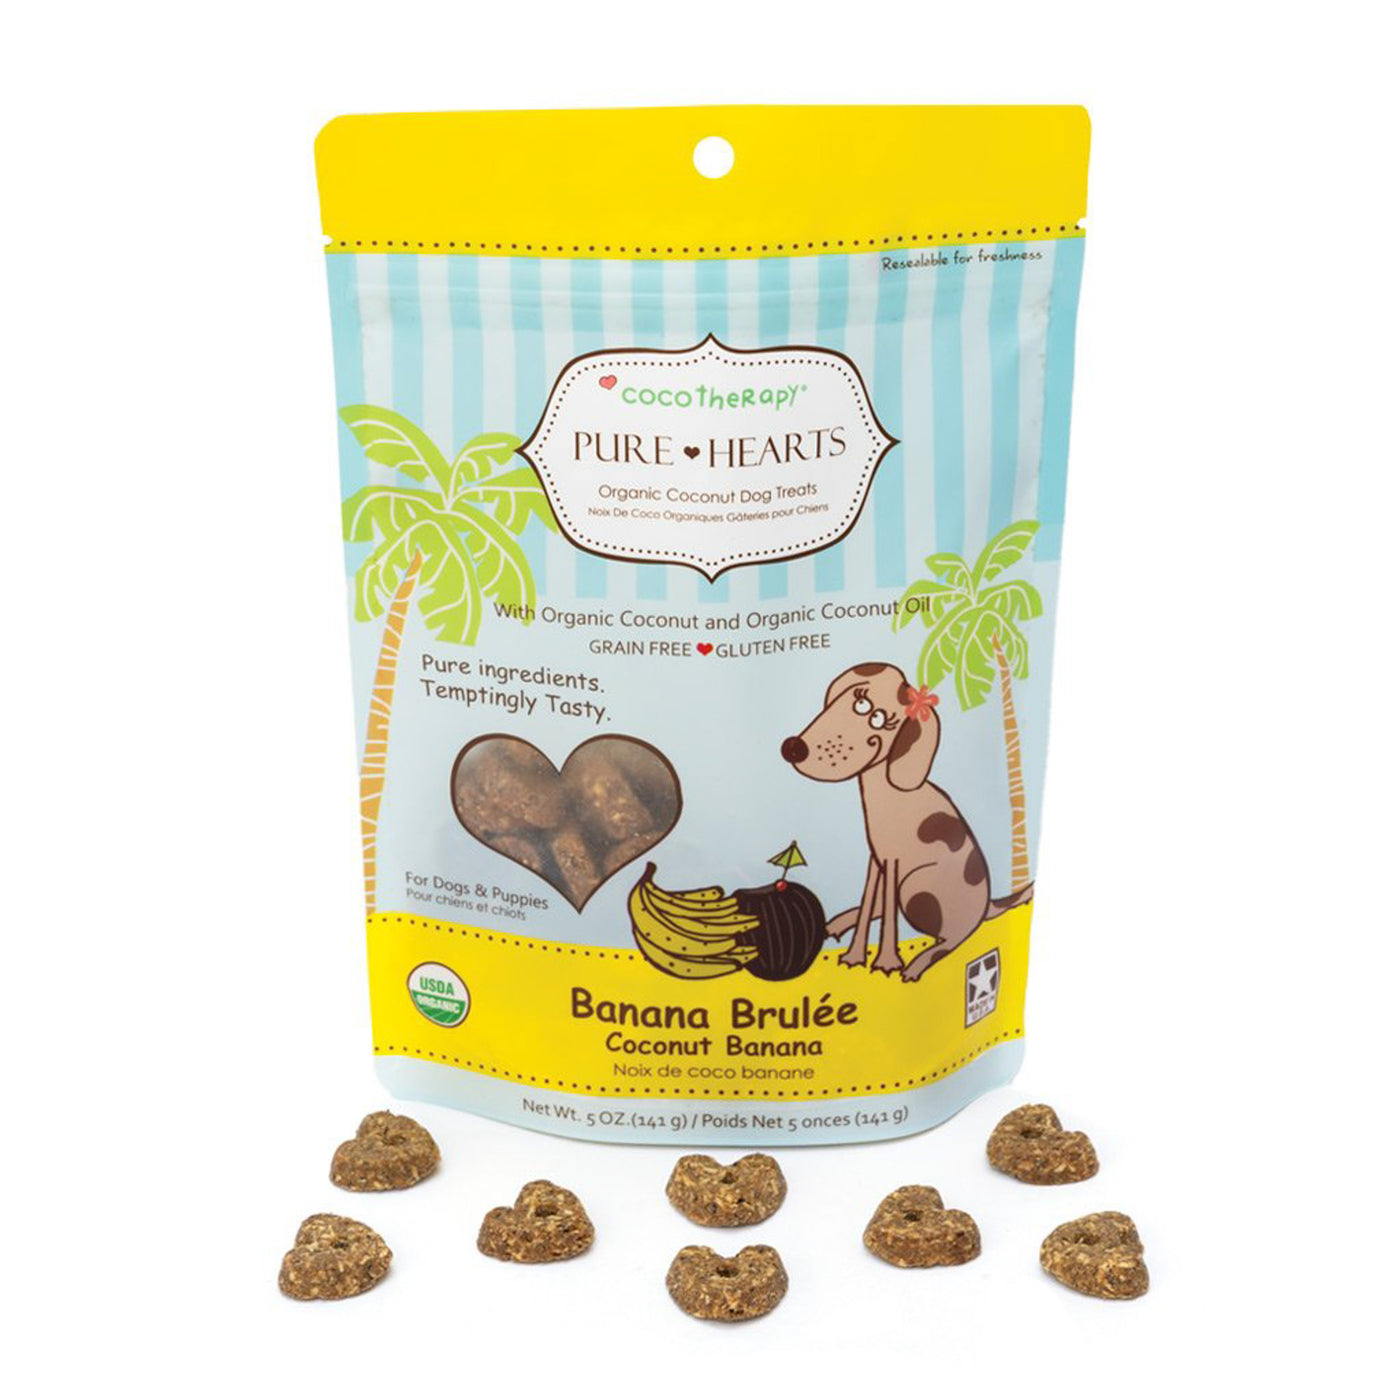 Coco Therapy Pure Hearts Banana Brulee dog treats in pouch with treats in front